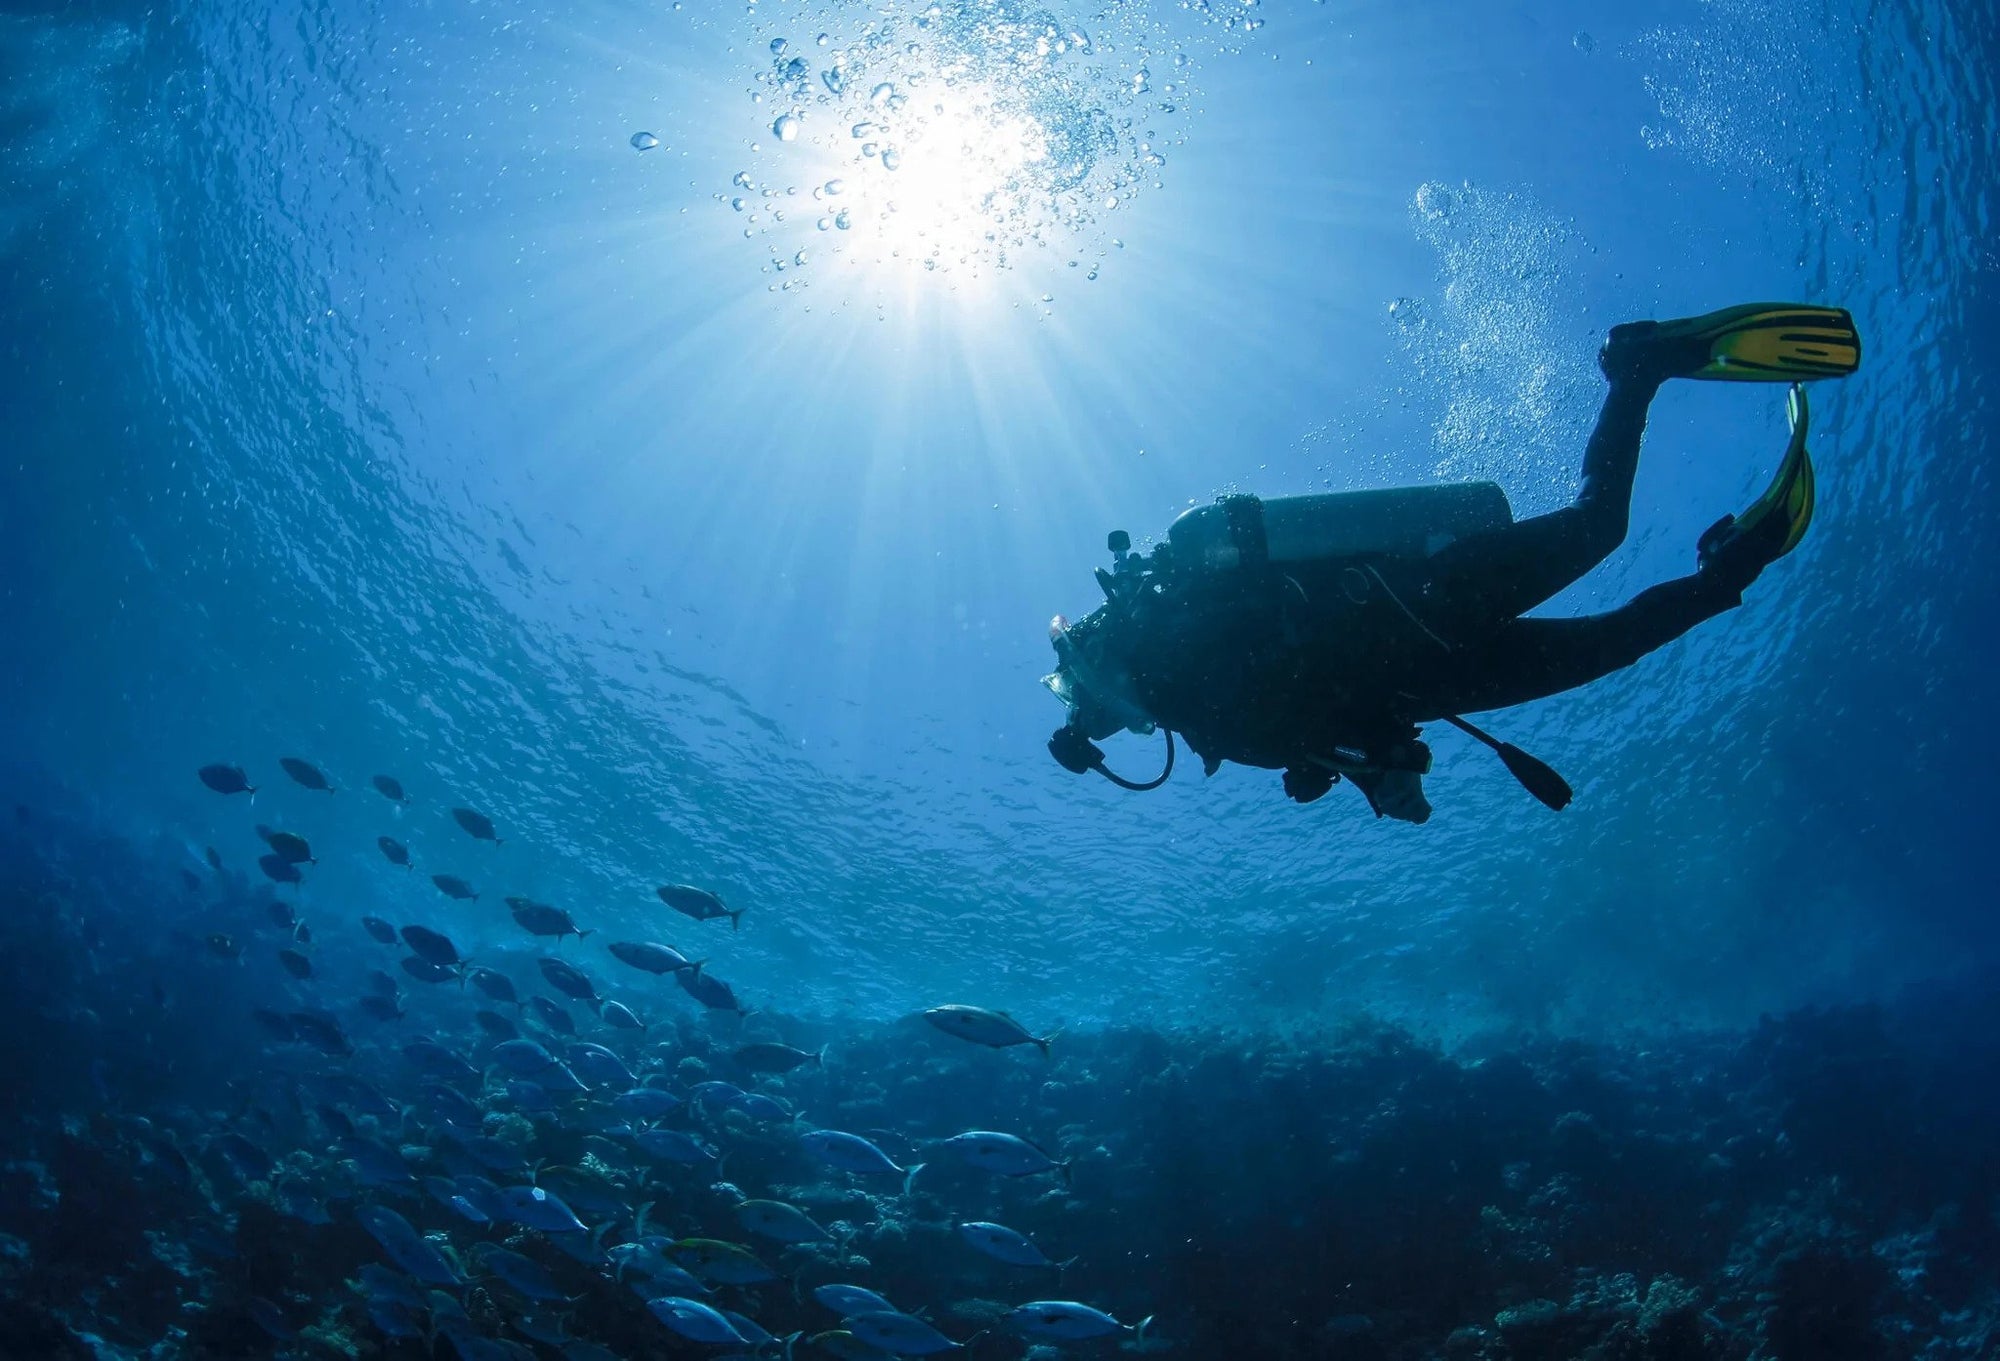 ‘How To Learn To Scuba Dive?’ And Other FAQs By Non-Divers